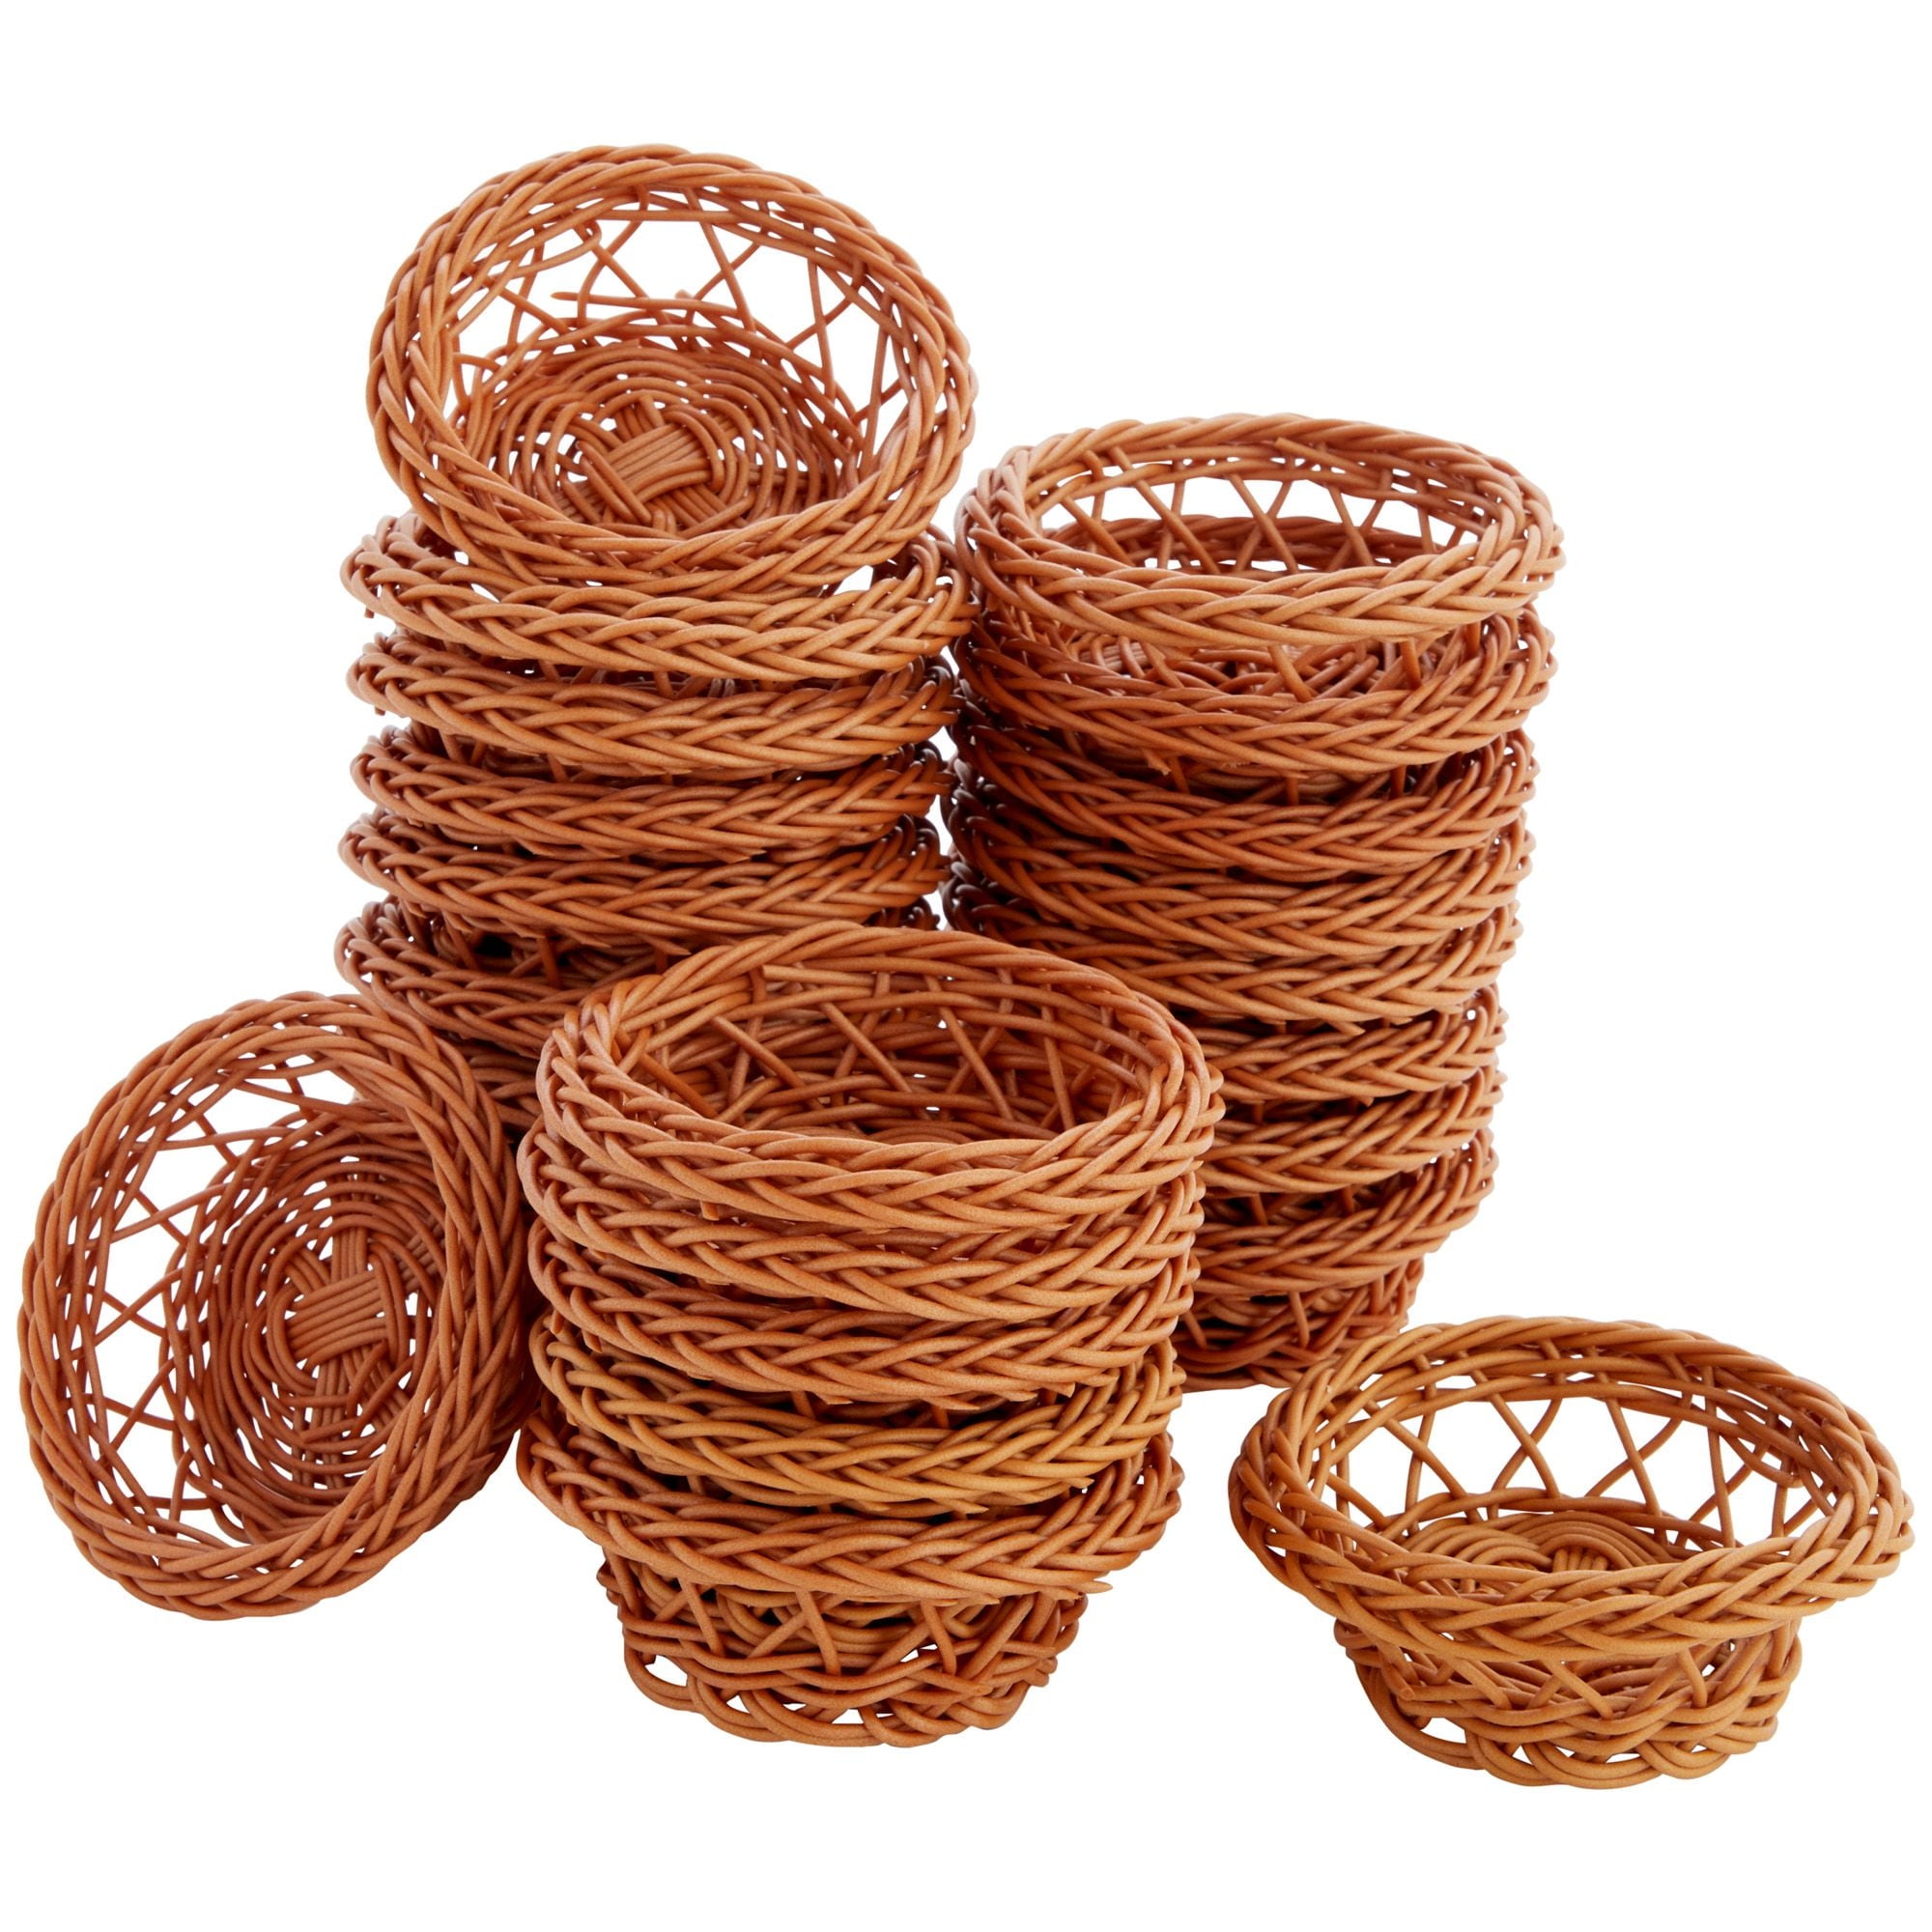  Didiseaon 24 pcs small wooden basket bushel baskets red riding  hood basket small baskets for gifts Mini Woven Baskets Tiny Basket mini  baskets mini handheld baskets candy toy box Chinese fir 